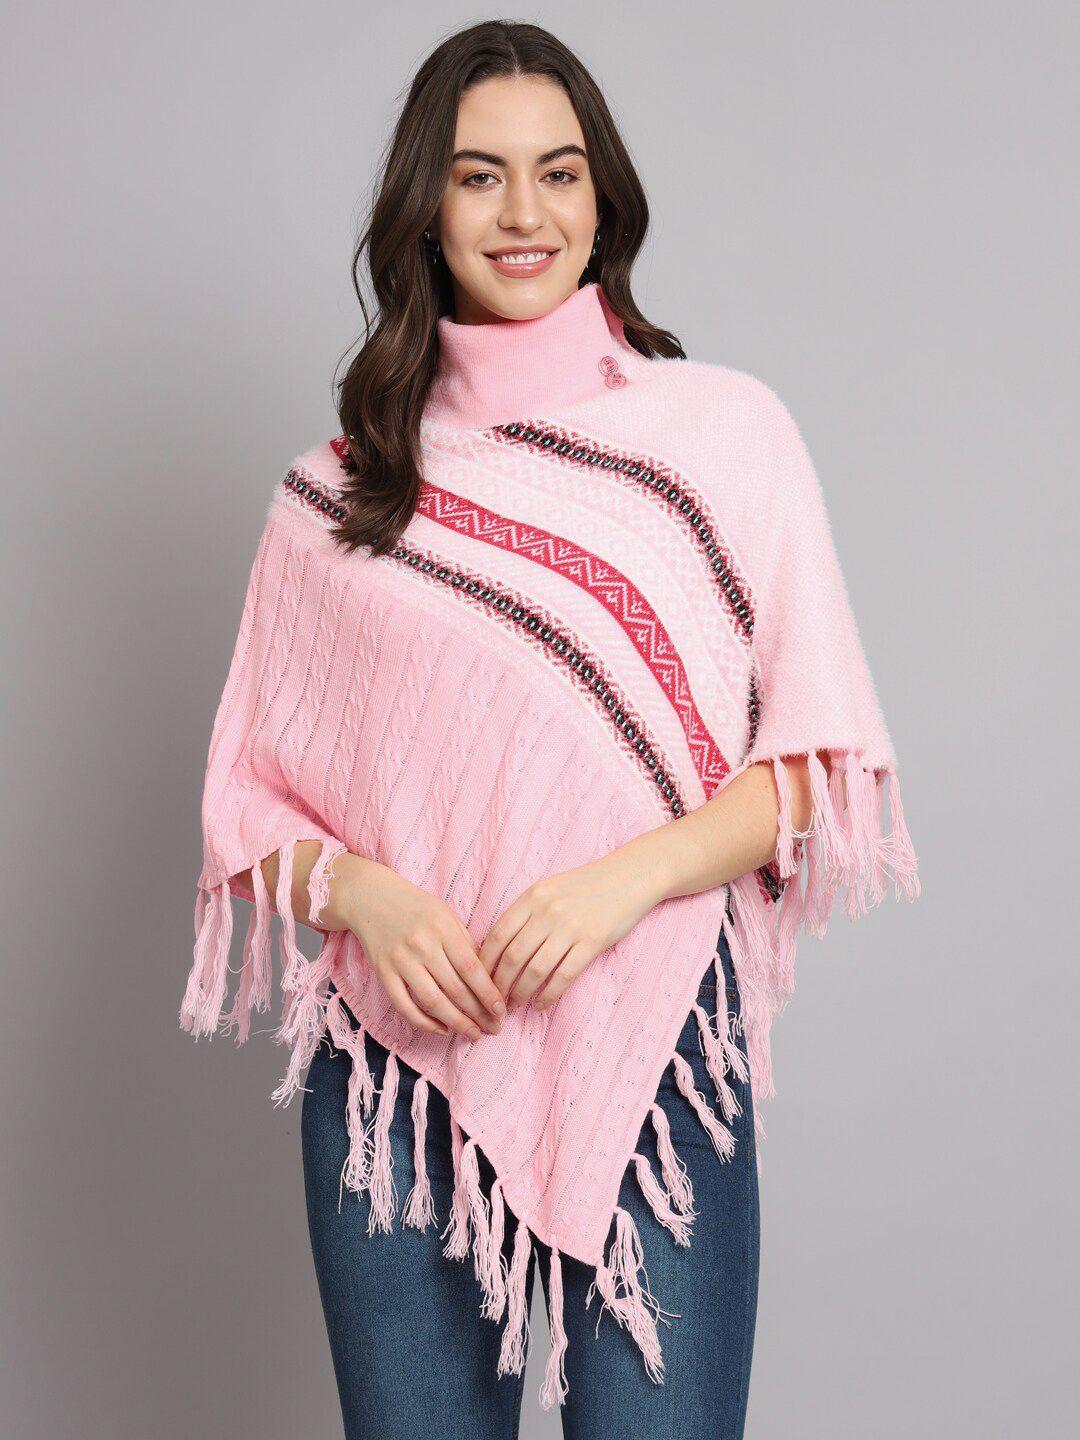 ewools striped turtle neck poncho sweaters